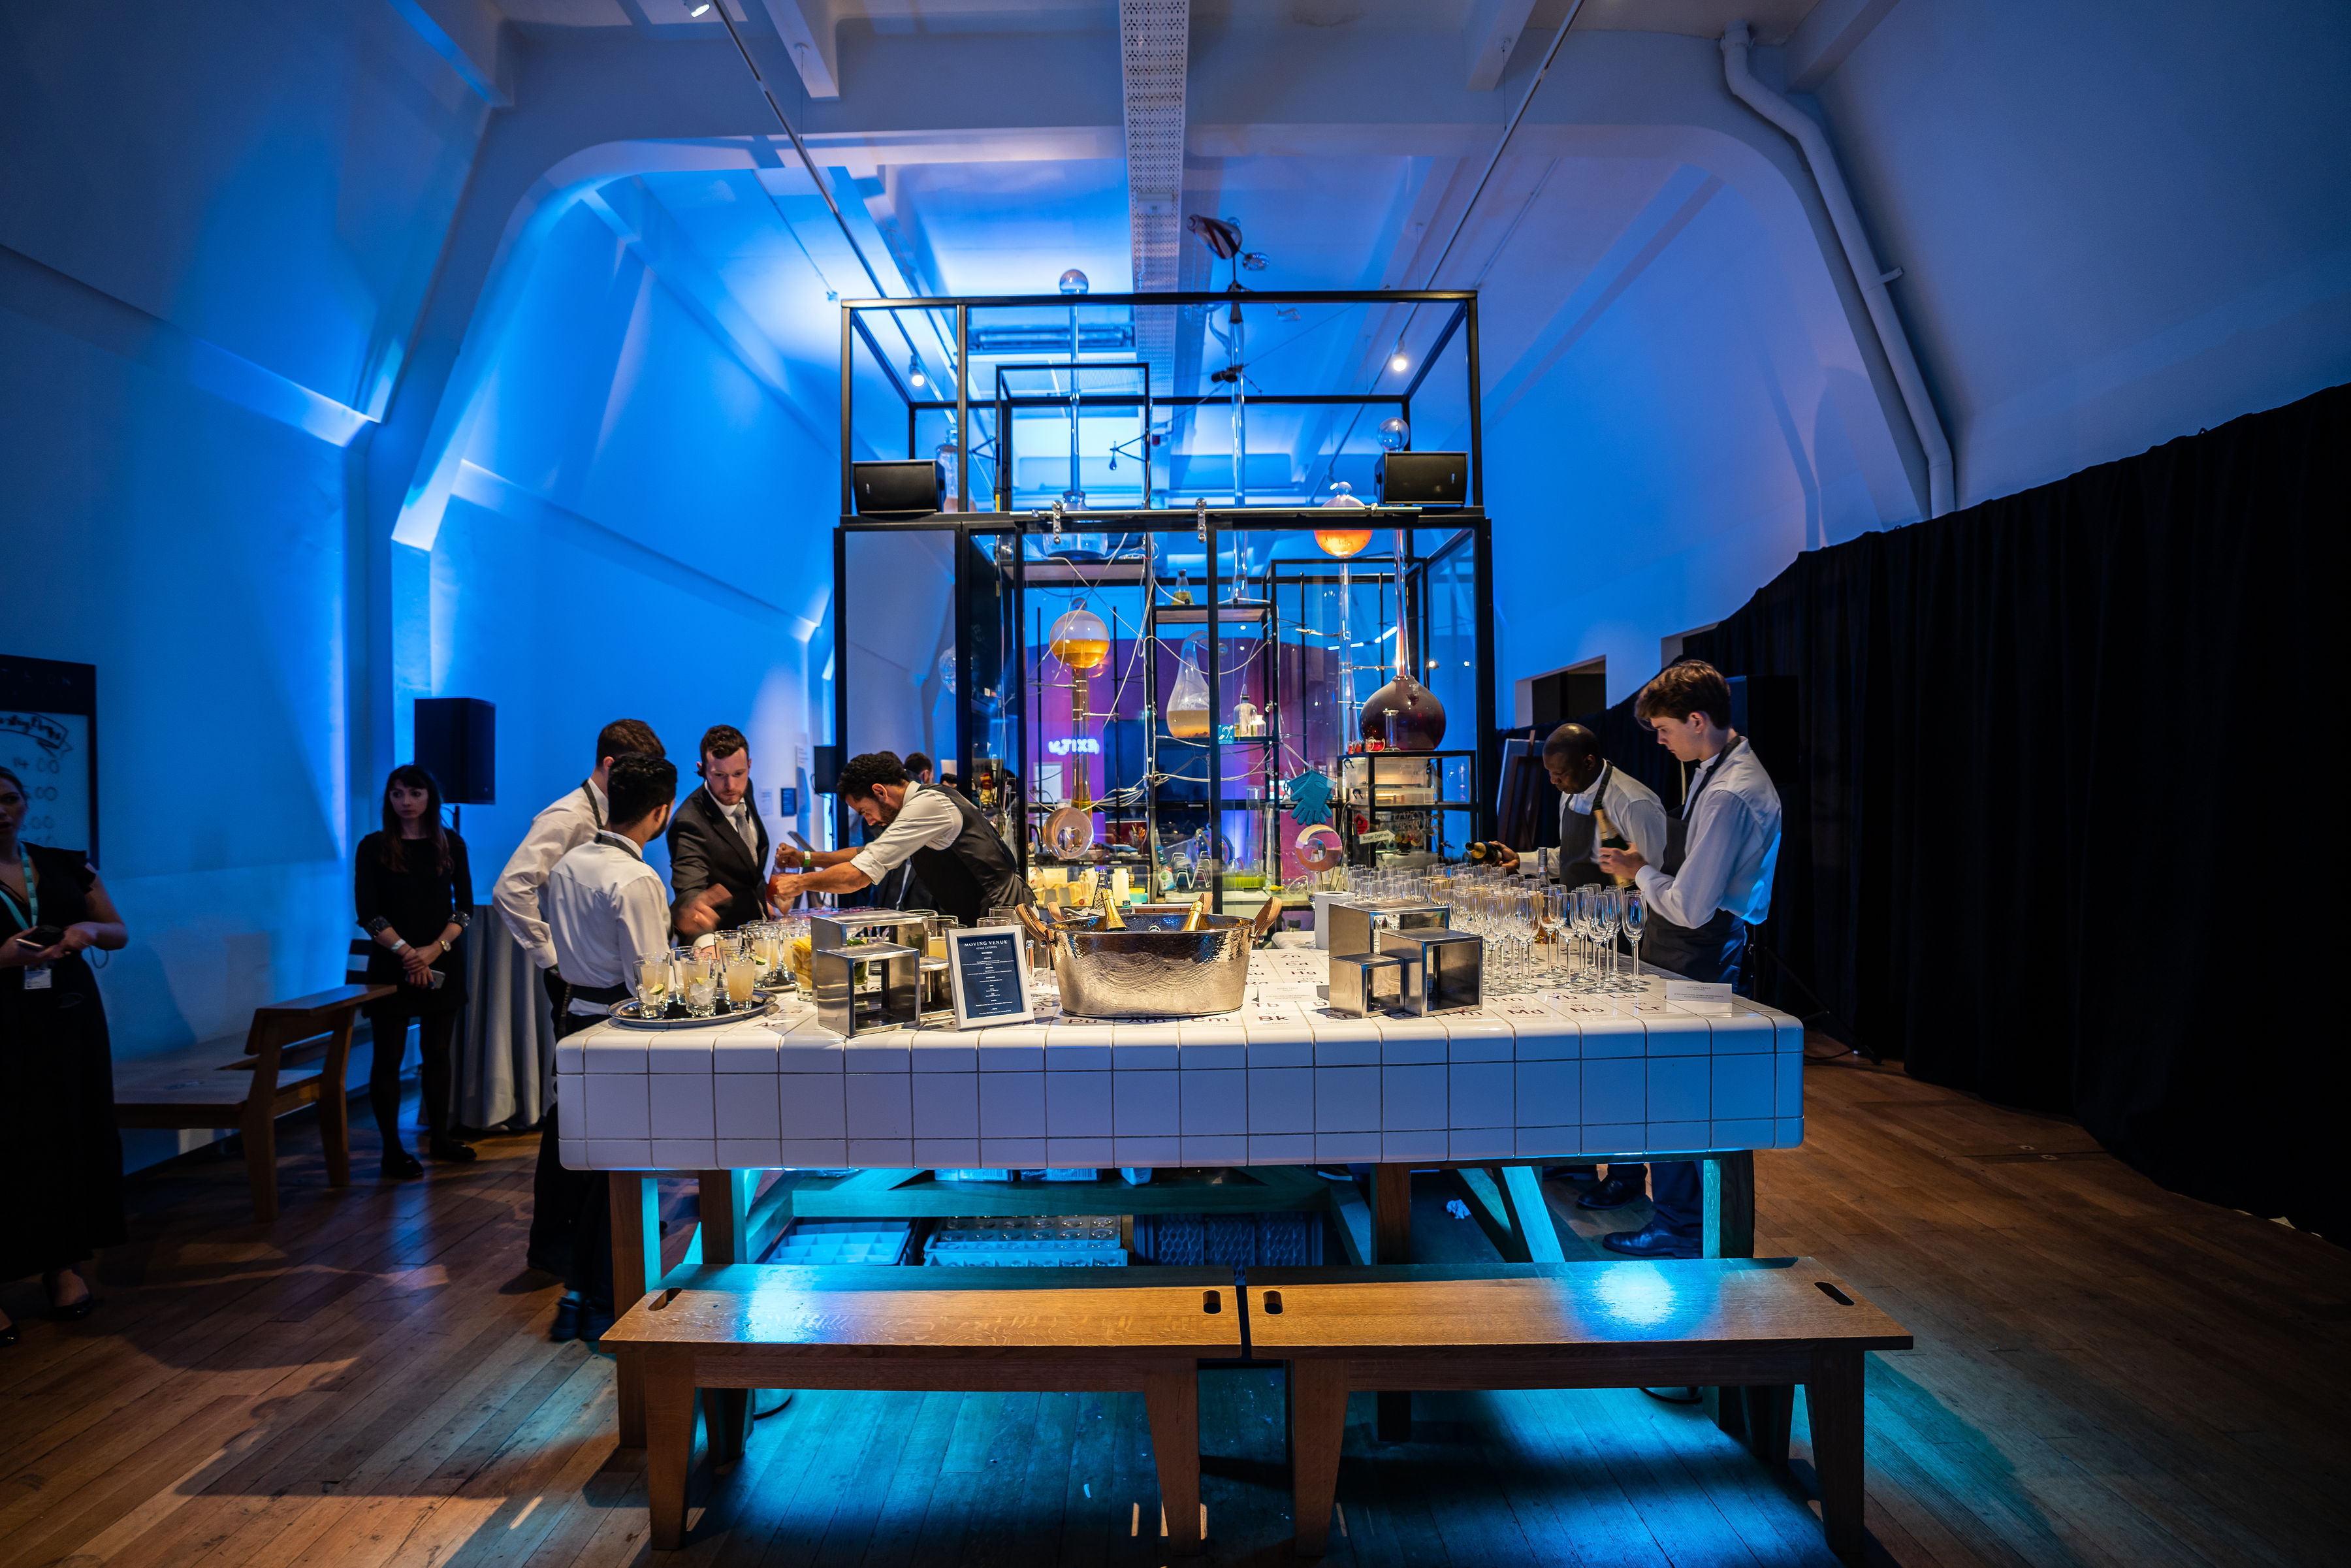 Wonderlab: The Equinor Gallery - Hire The Science Museum